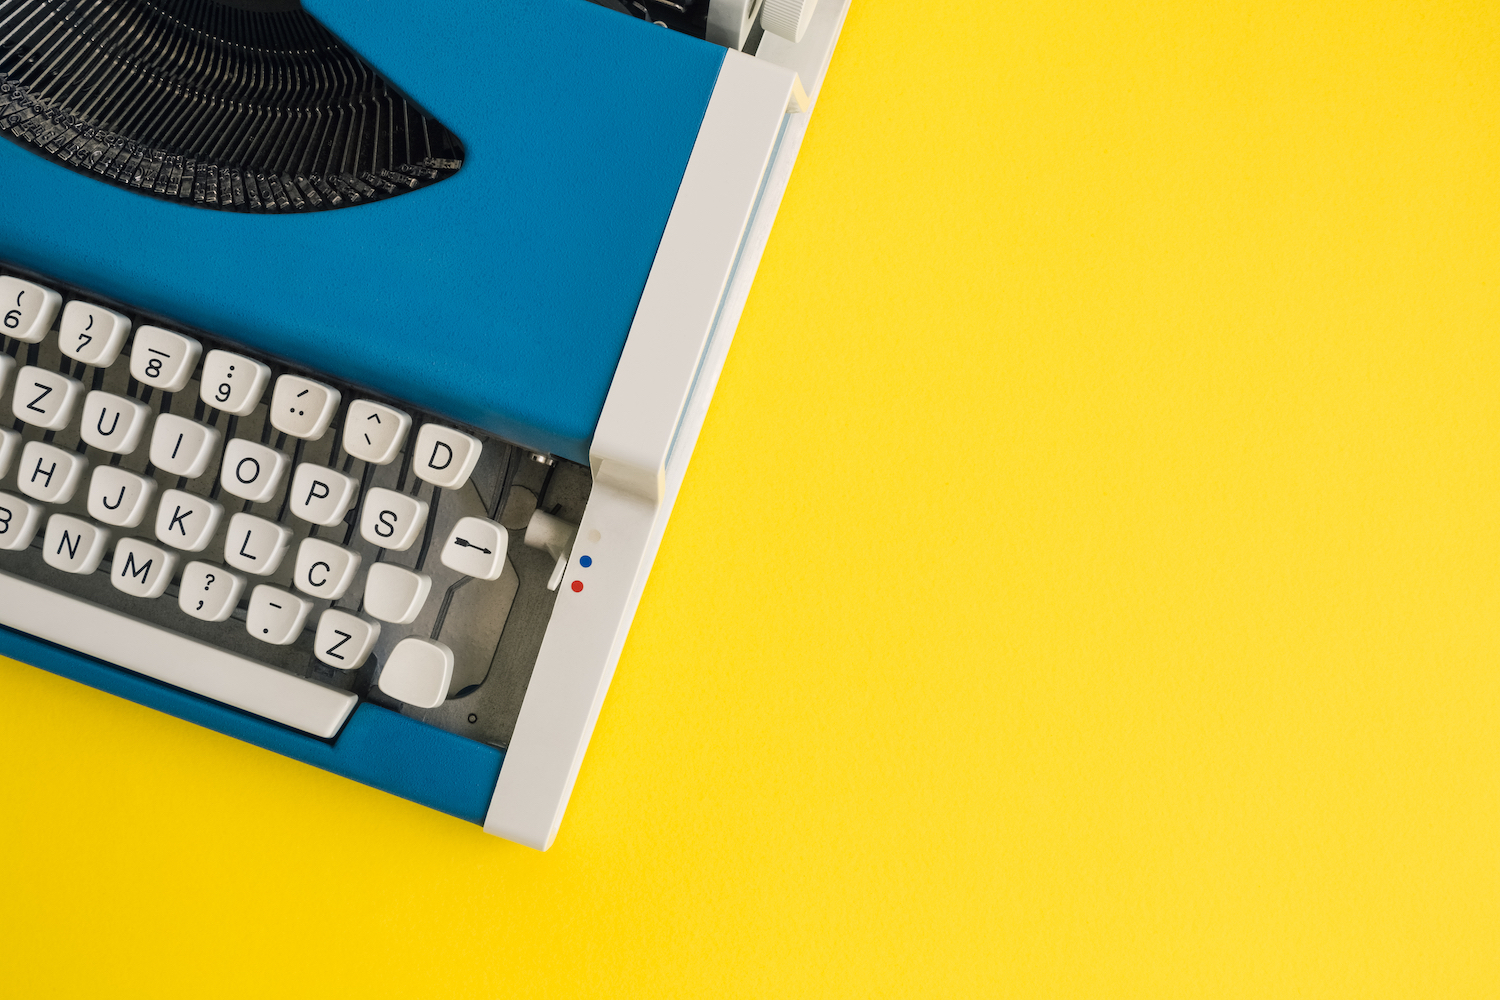 A close-up photograph of a retro typewriter to contrast this call for best reporting on AI.